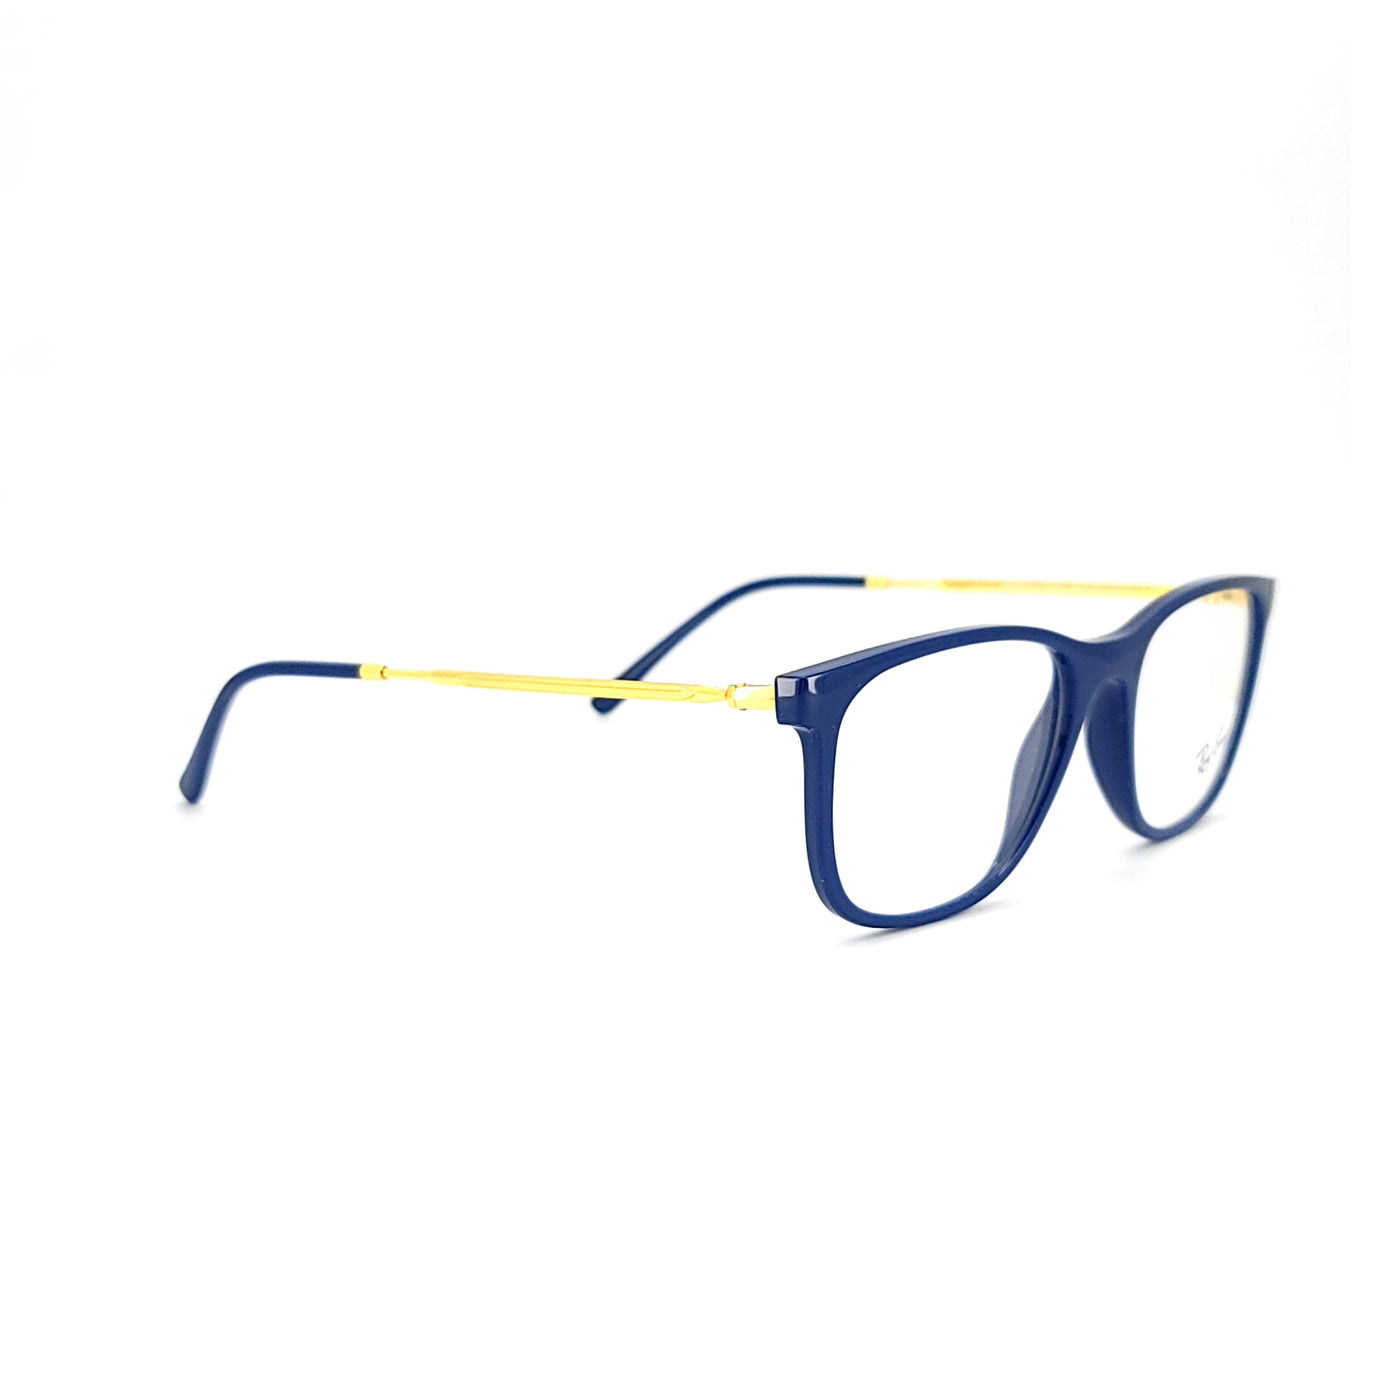 Ray-Ban Highstreet RB7244/8100_53 | Eyeglasses - Vision Express Optical Philippines